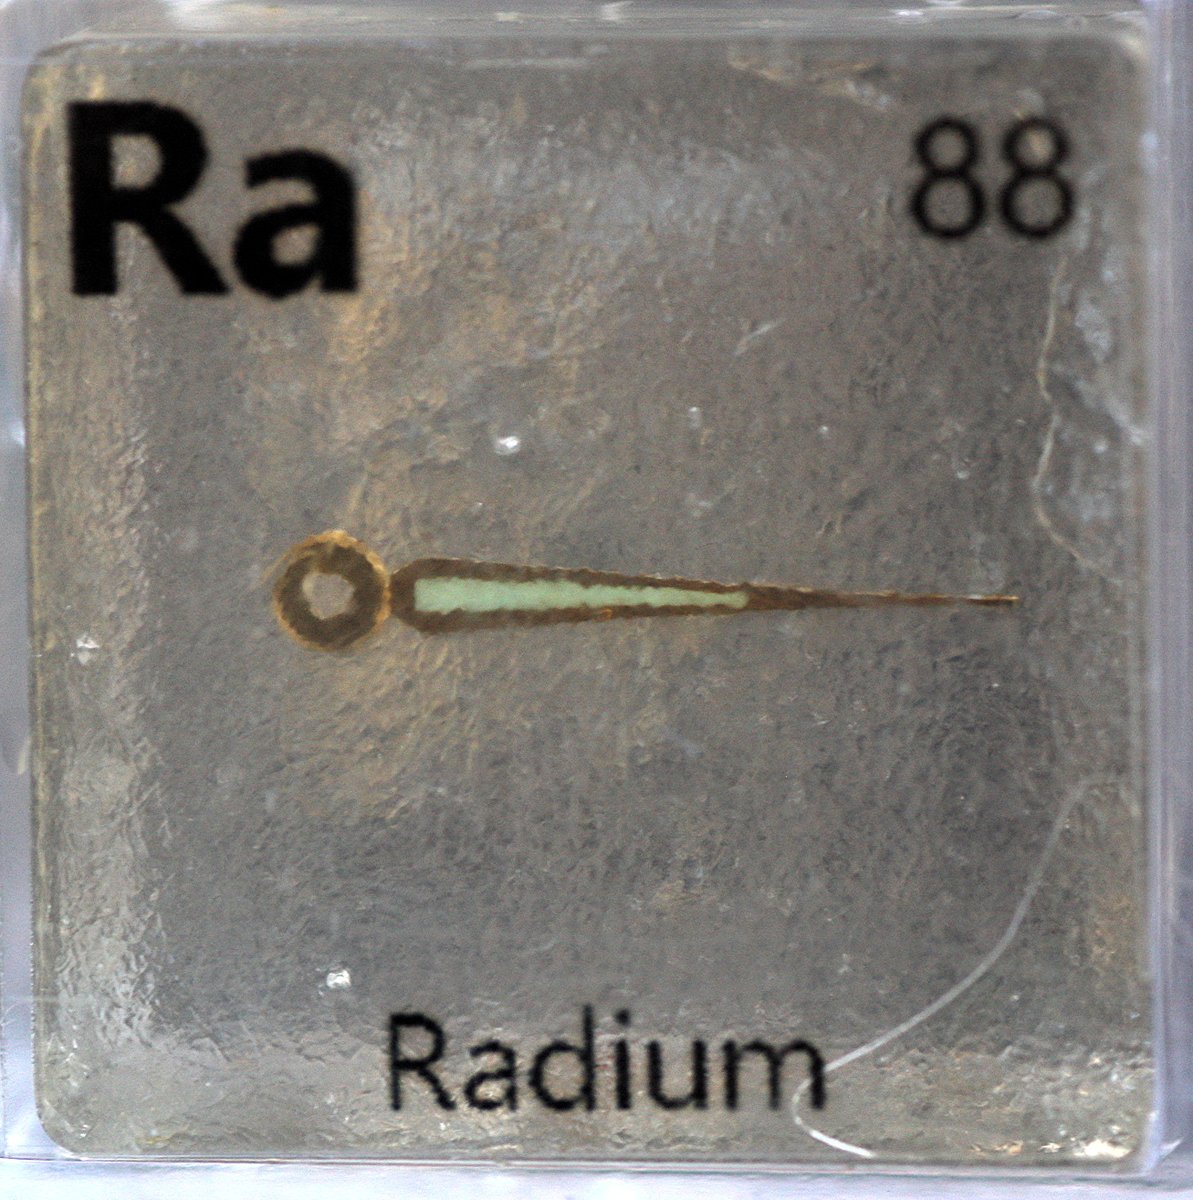 Radium  #elementphotos. Radioactive Ra salts are used (rarely nowadays) in luminescent paints for things like watch hands and dials.